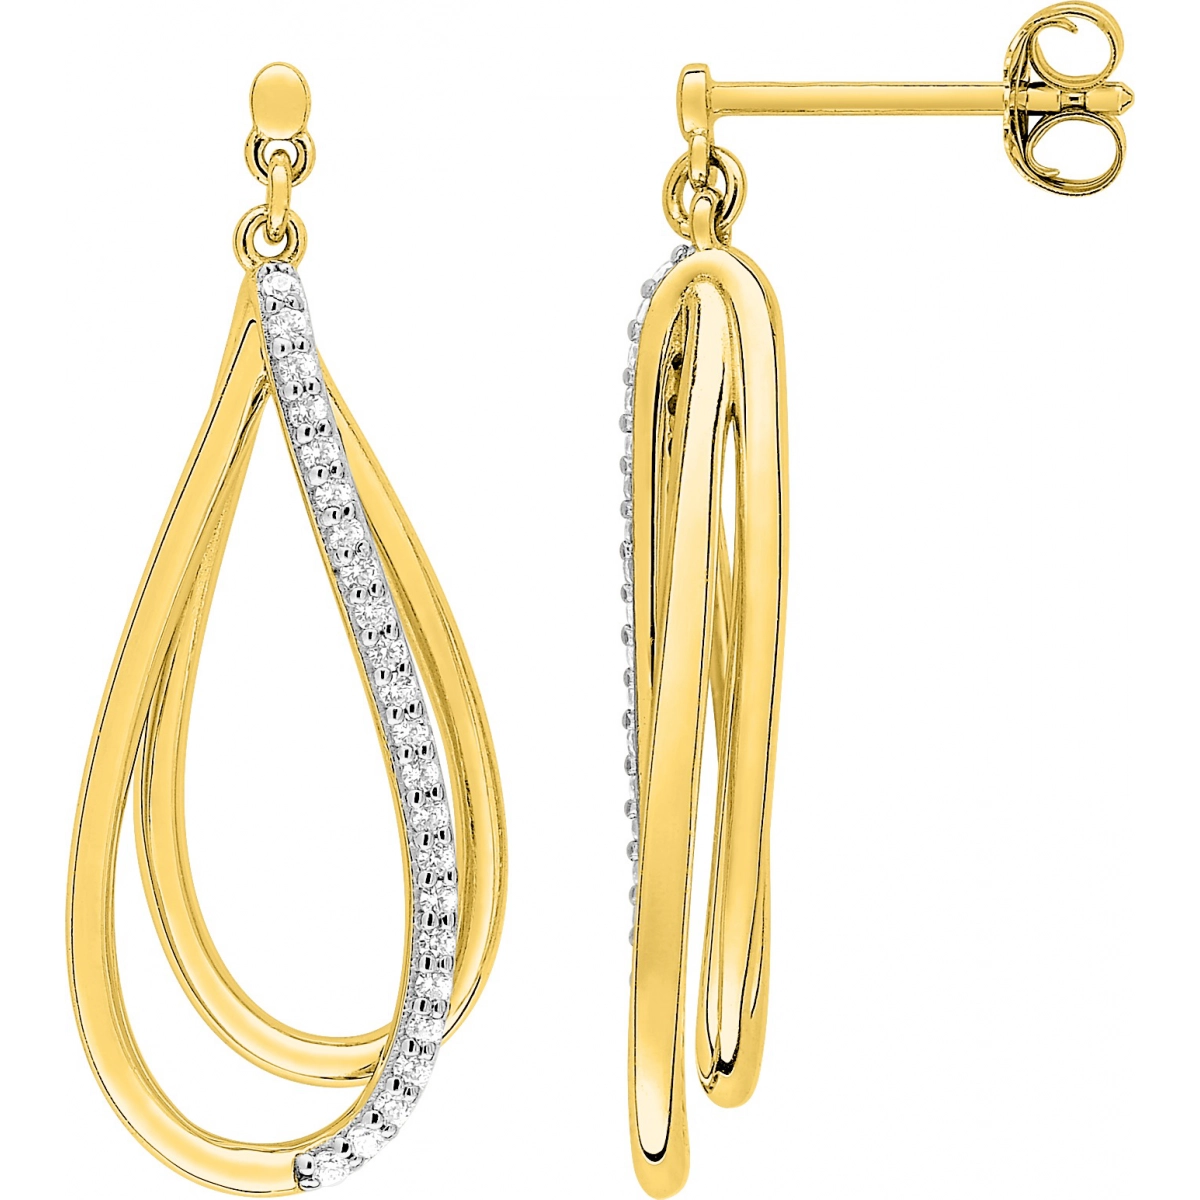 Earrings pair w. cz and rh gold plated Brass  Lua Blanca  BSWA133Z.0